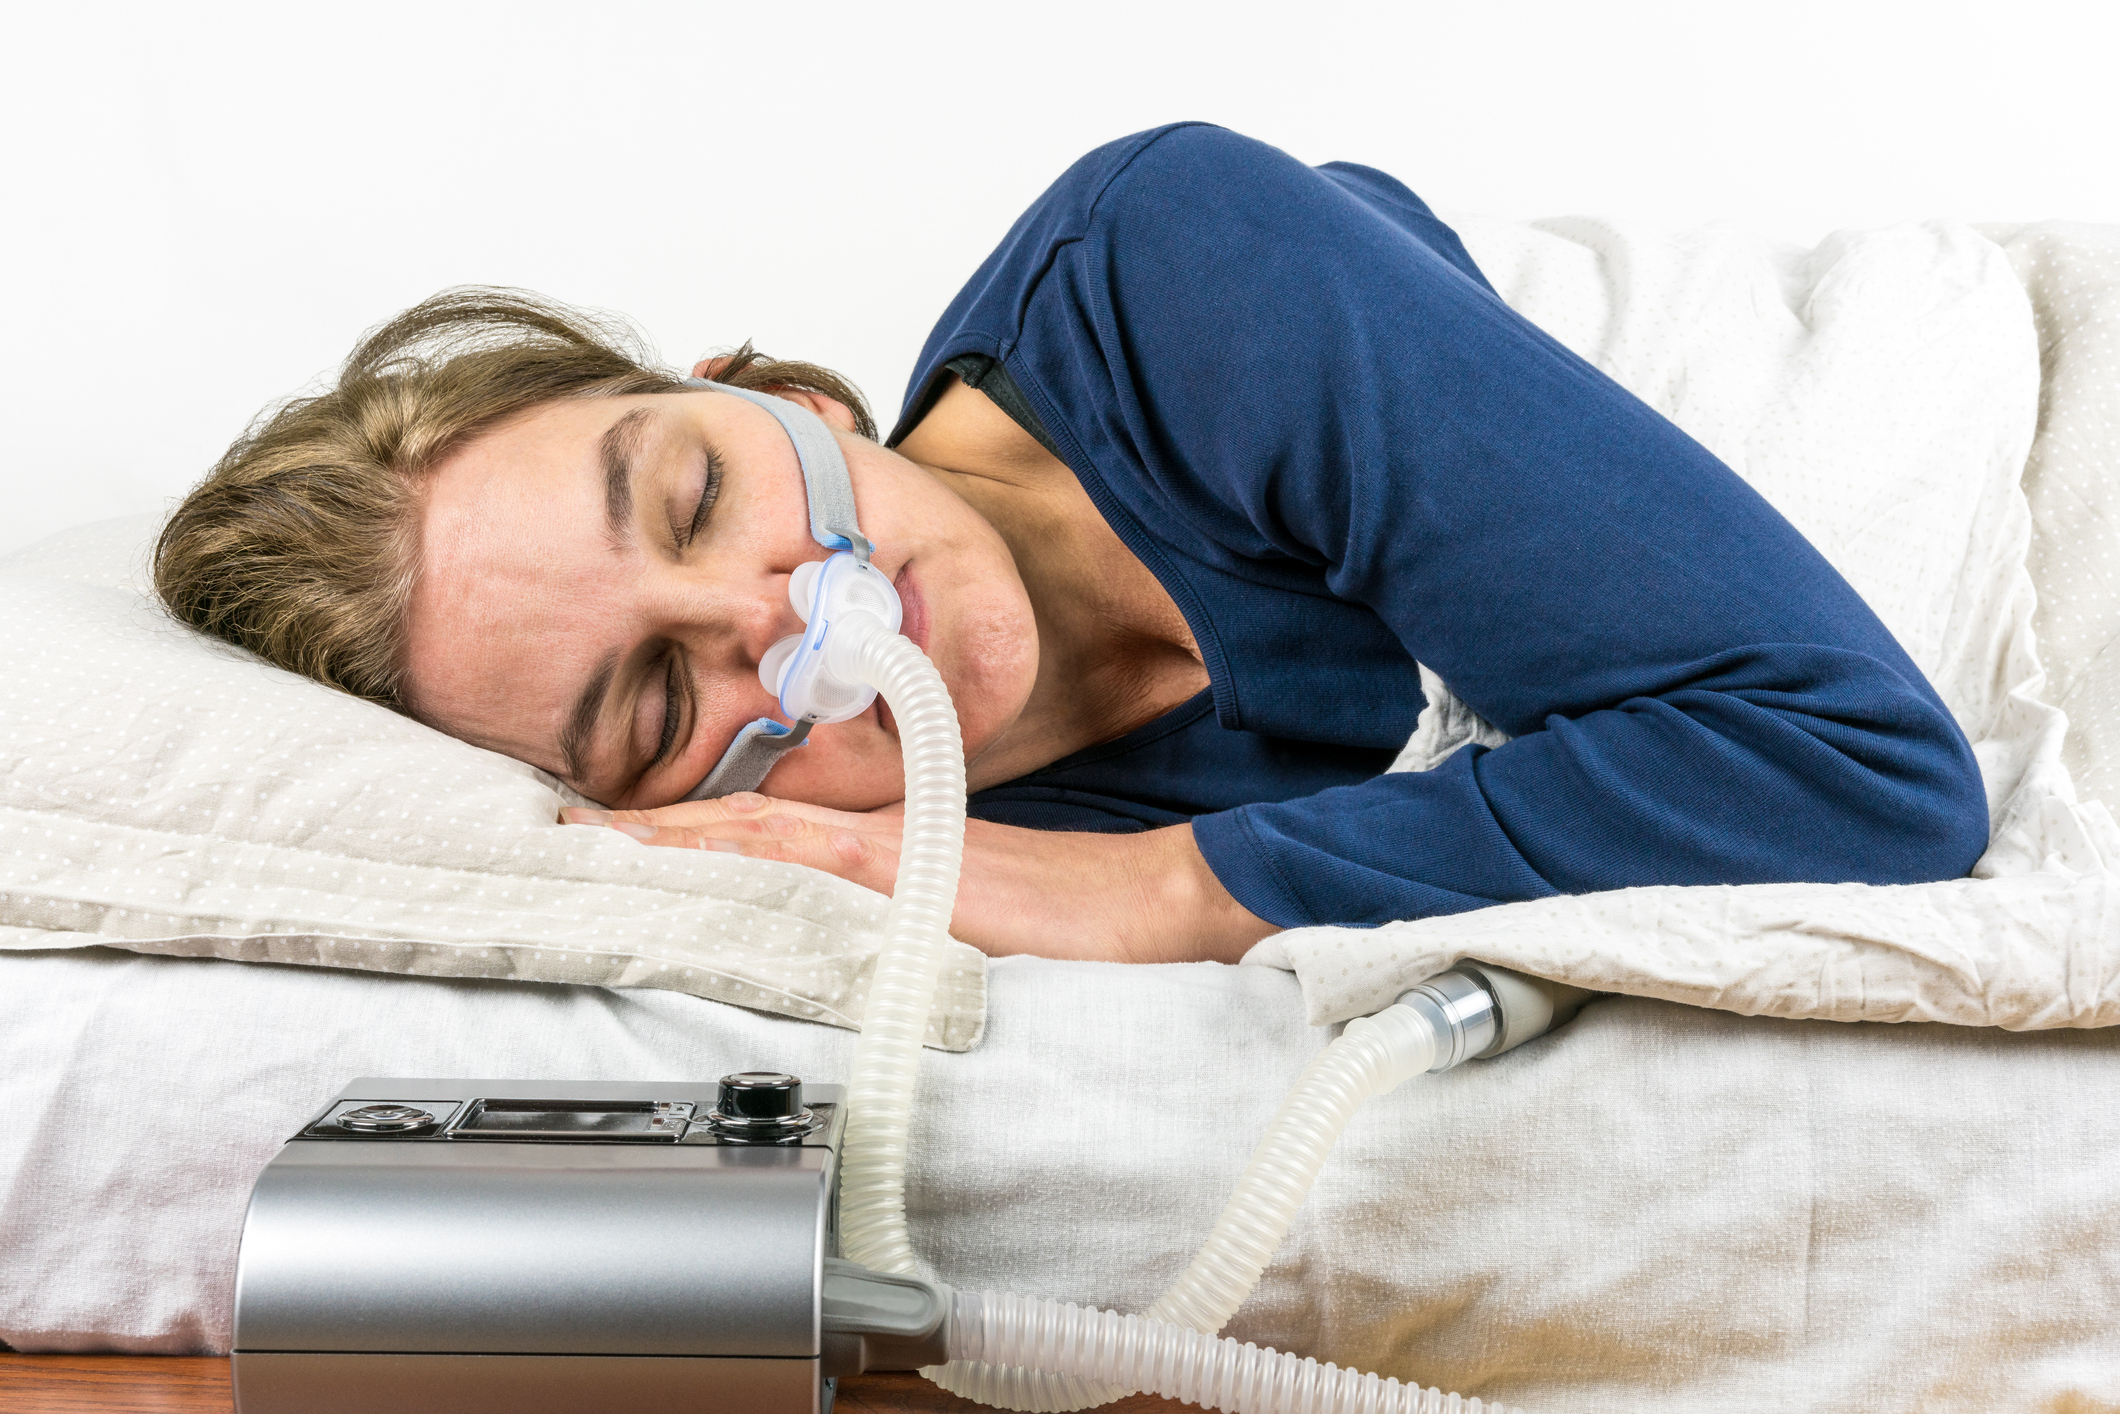 Female Adult sleeping on side with CPAP machine attached